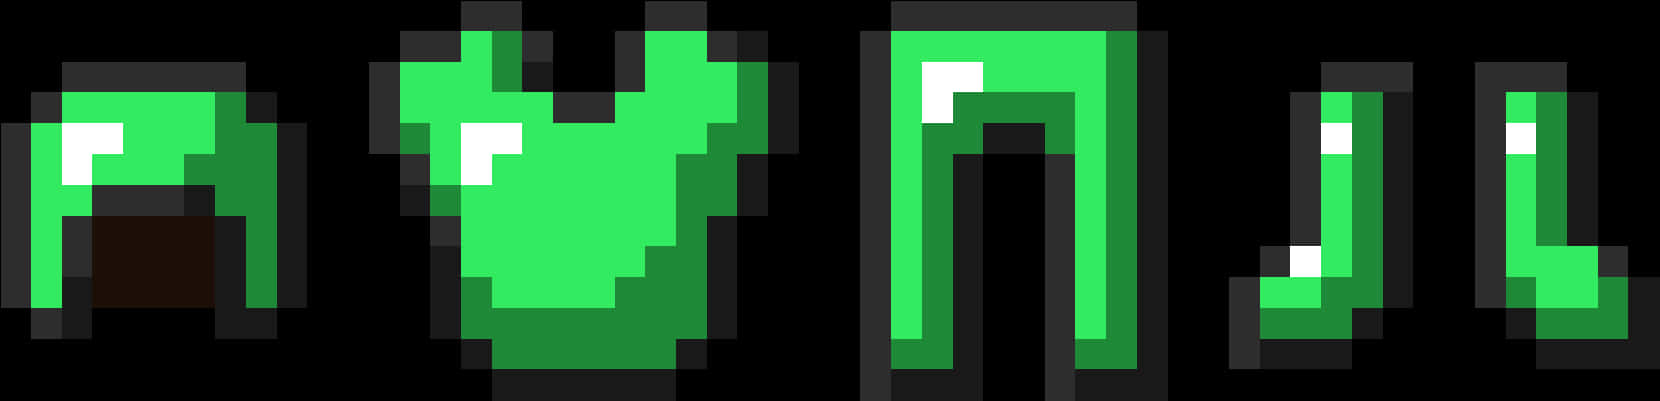 A Green And Black Pixelated Objects